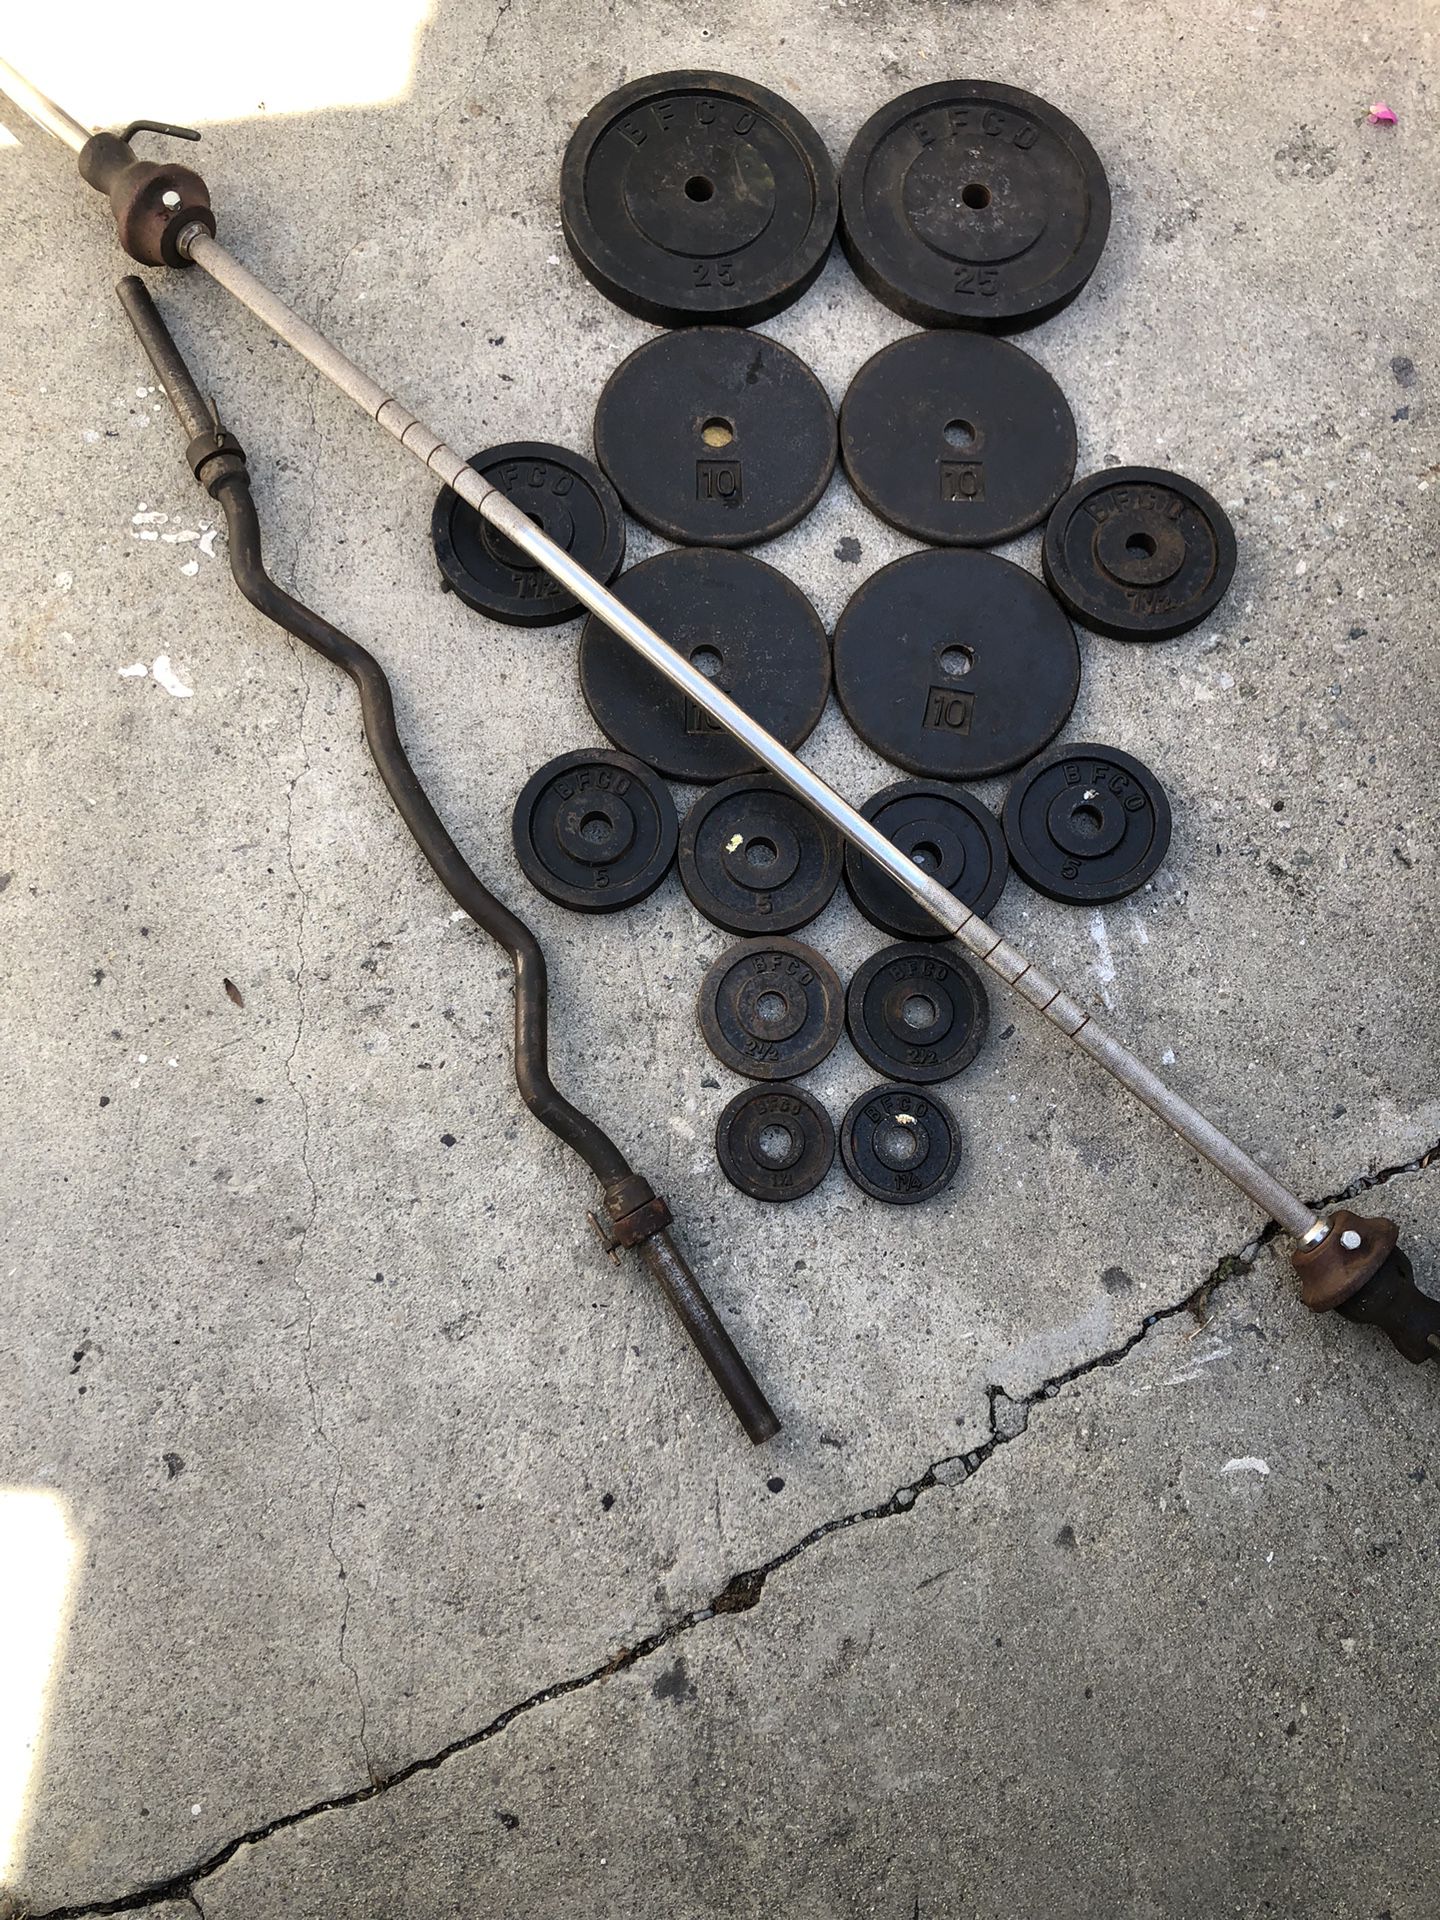 Standard Weights With Straight Bar and Curl Bar. Selling all together for $130 firm